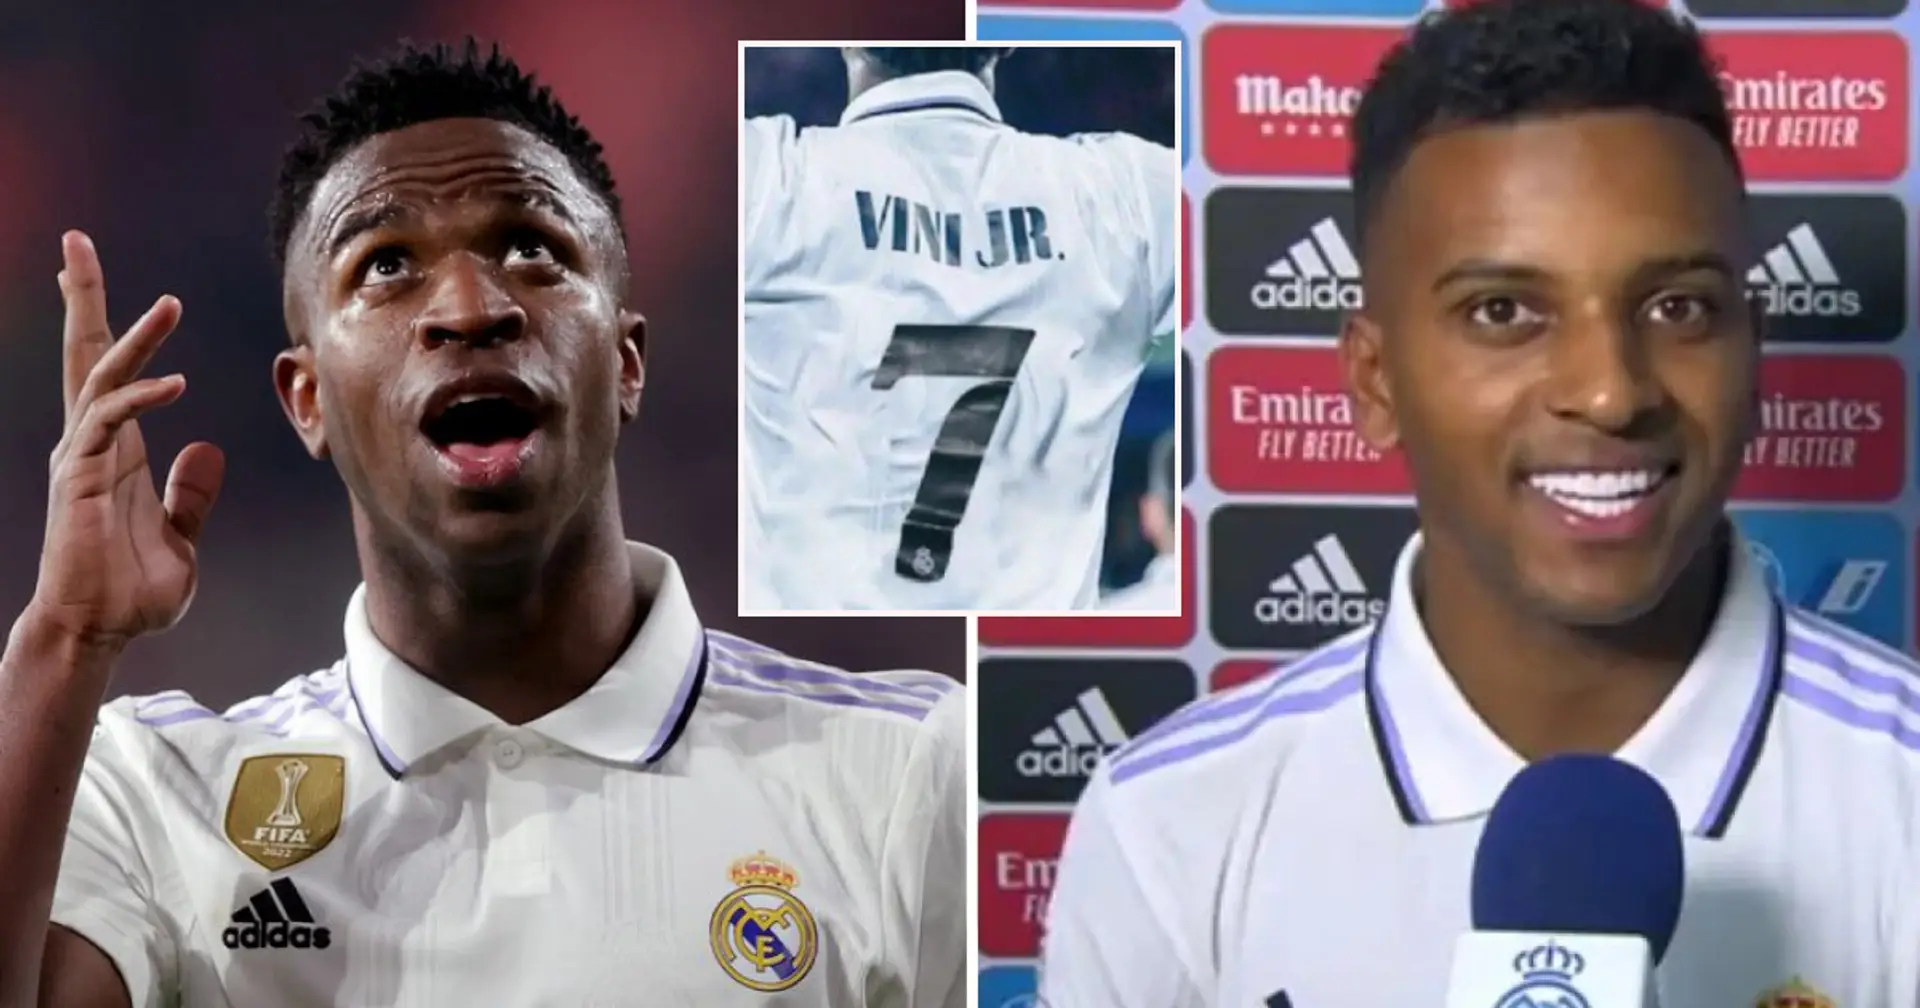 OFFICIAL: Vinicius takes up no. 7 at Real Madrid, Rodrygo gets new no. too